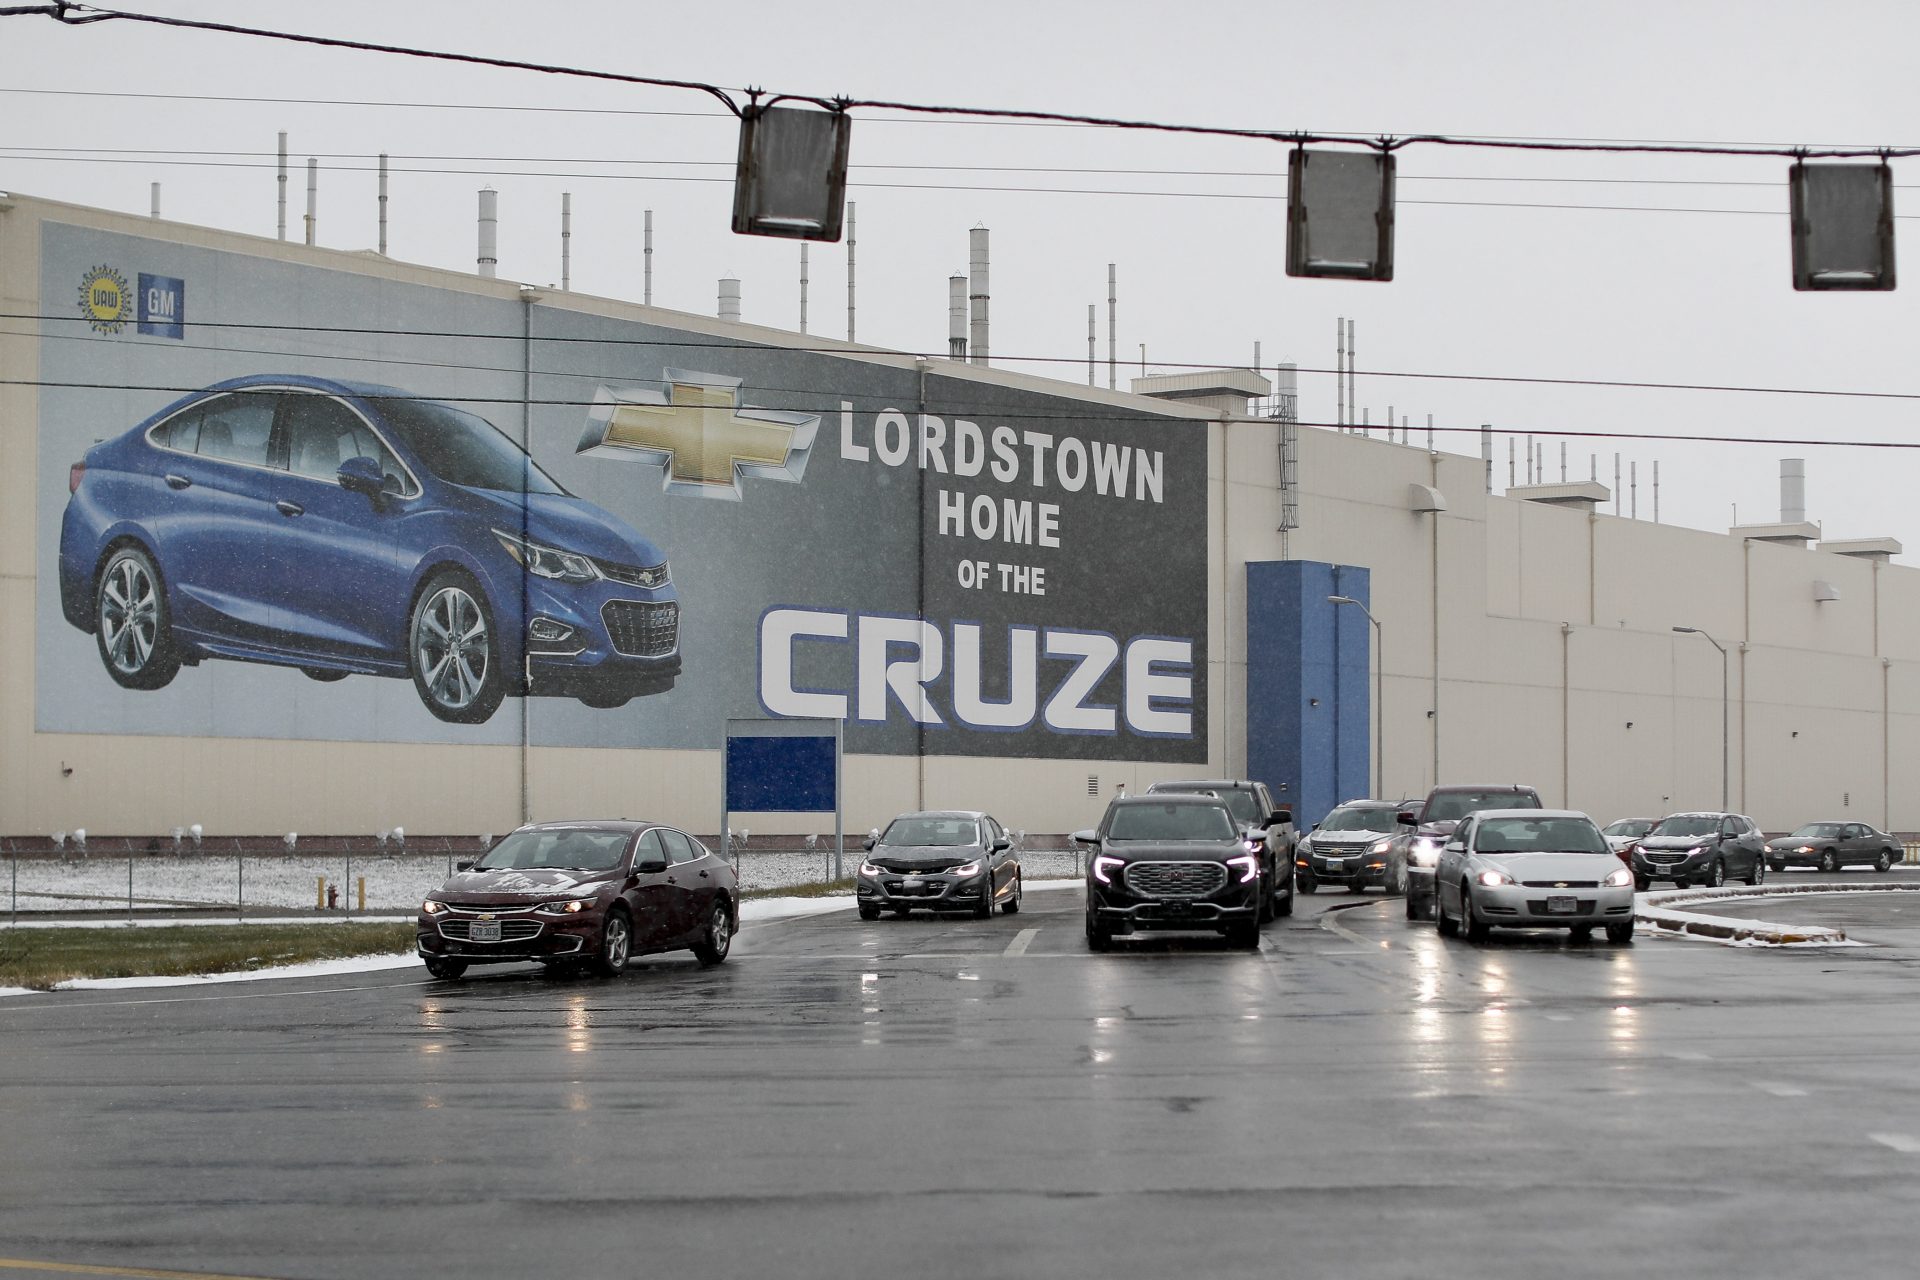 FILE PHOTO: In this Nov. 27, 2018, file photo a banner depicting the Chevrolet Cruze model vehicle is displayed at the General Motors' Lordstown plant in Lordstown, Ohio. An economic renaissance in the industrial Midwest promised by President Donald Trump has suffered in recent weeks in ways that could be problematic for Trump's 2020 re-election